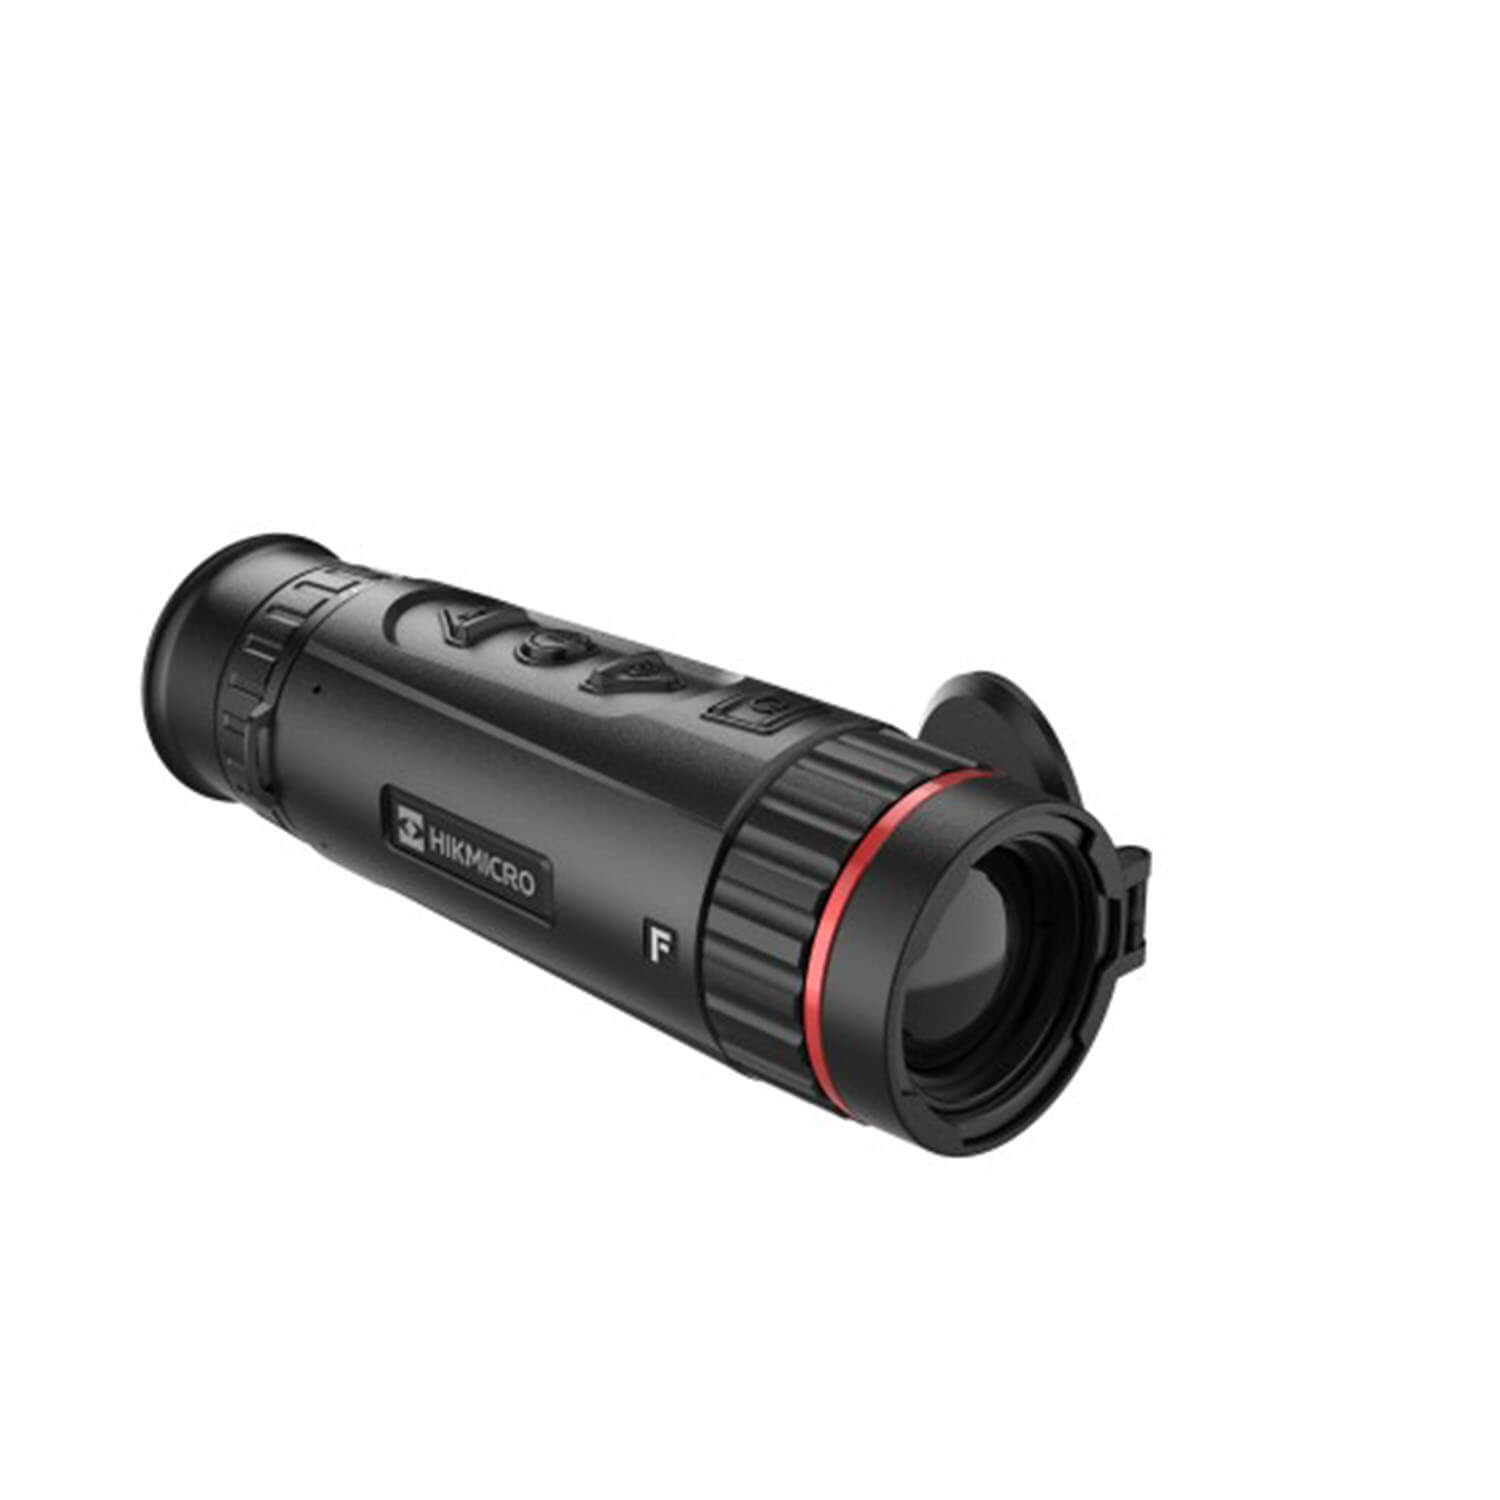 Hikmicro thermal imaging scope Falcon FH25